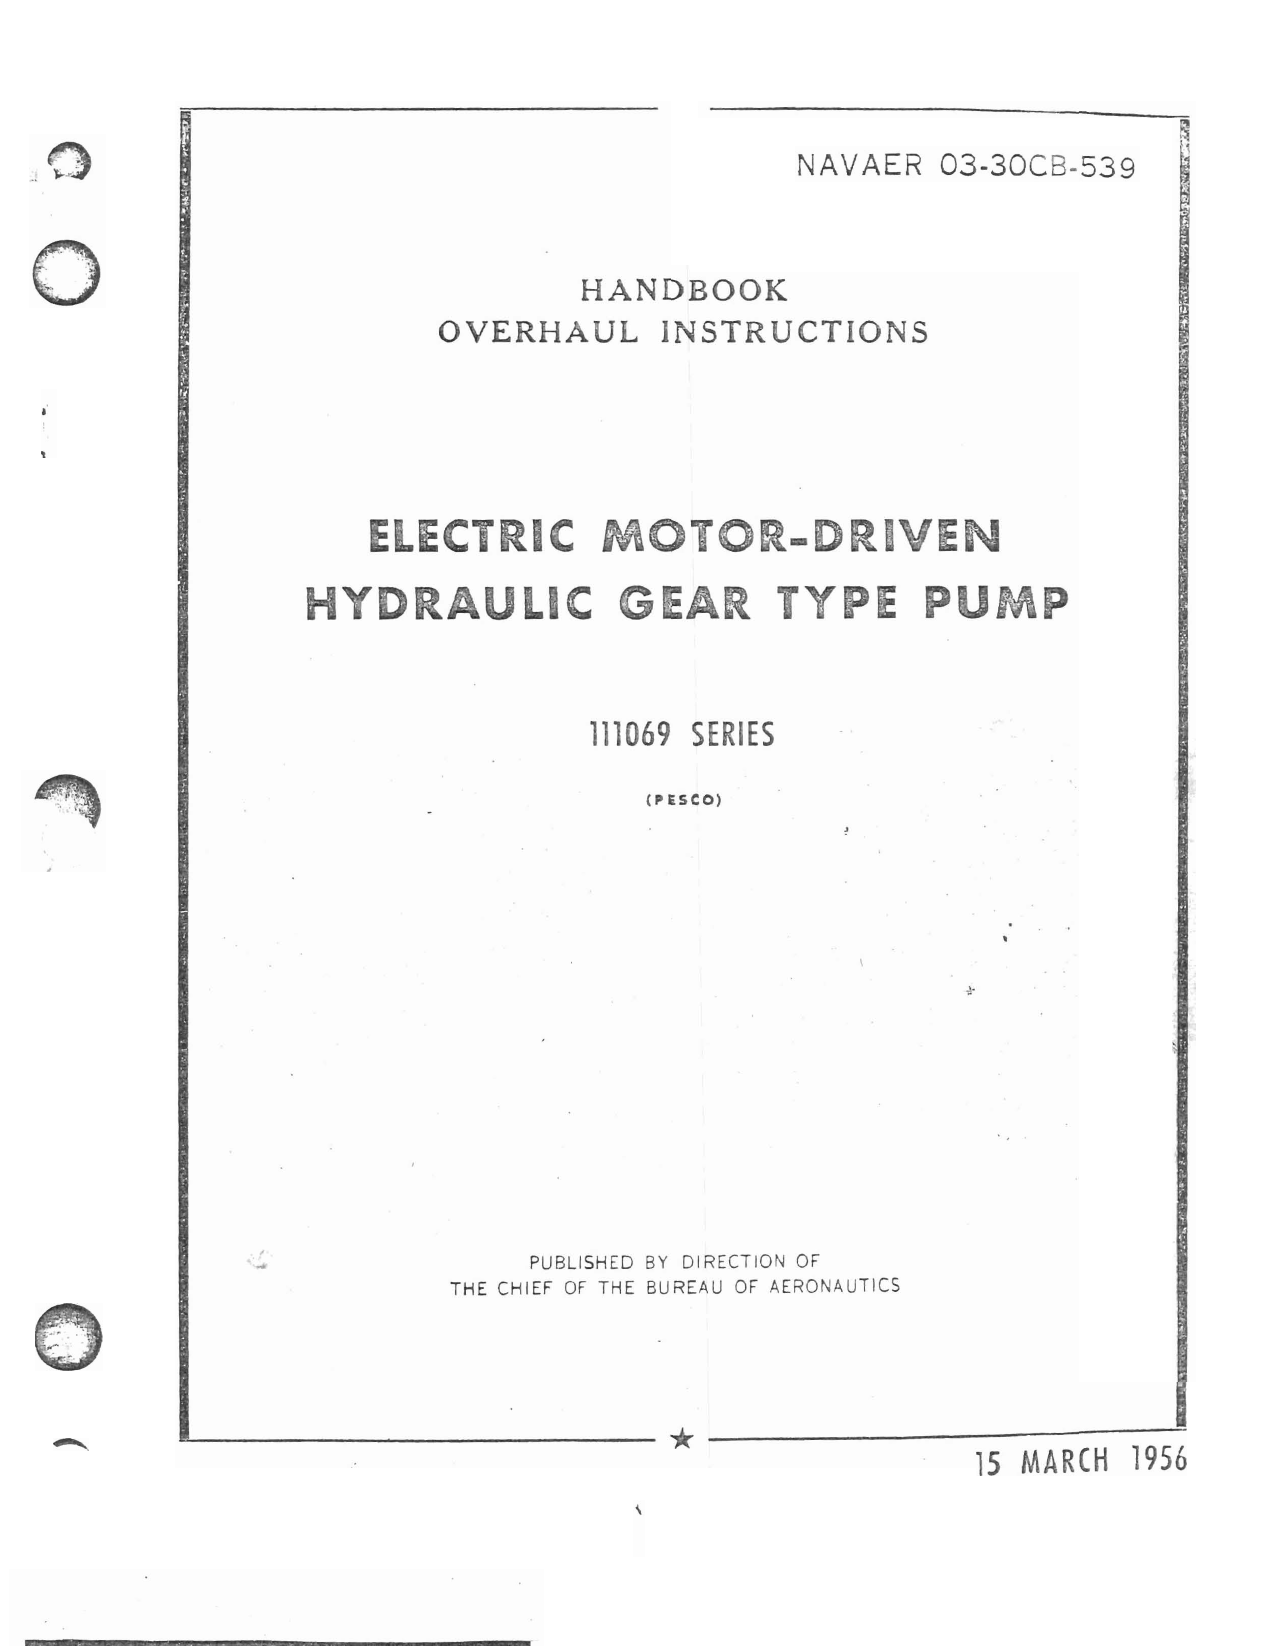 Sample page 1 from AirCorps Library document: Overhaul Instructions for Electric Motor-Driven Hydraulic Gear Type Pump - 111069 Series